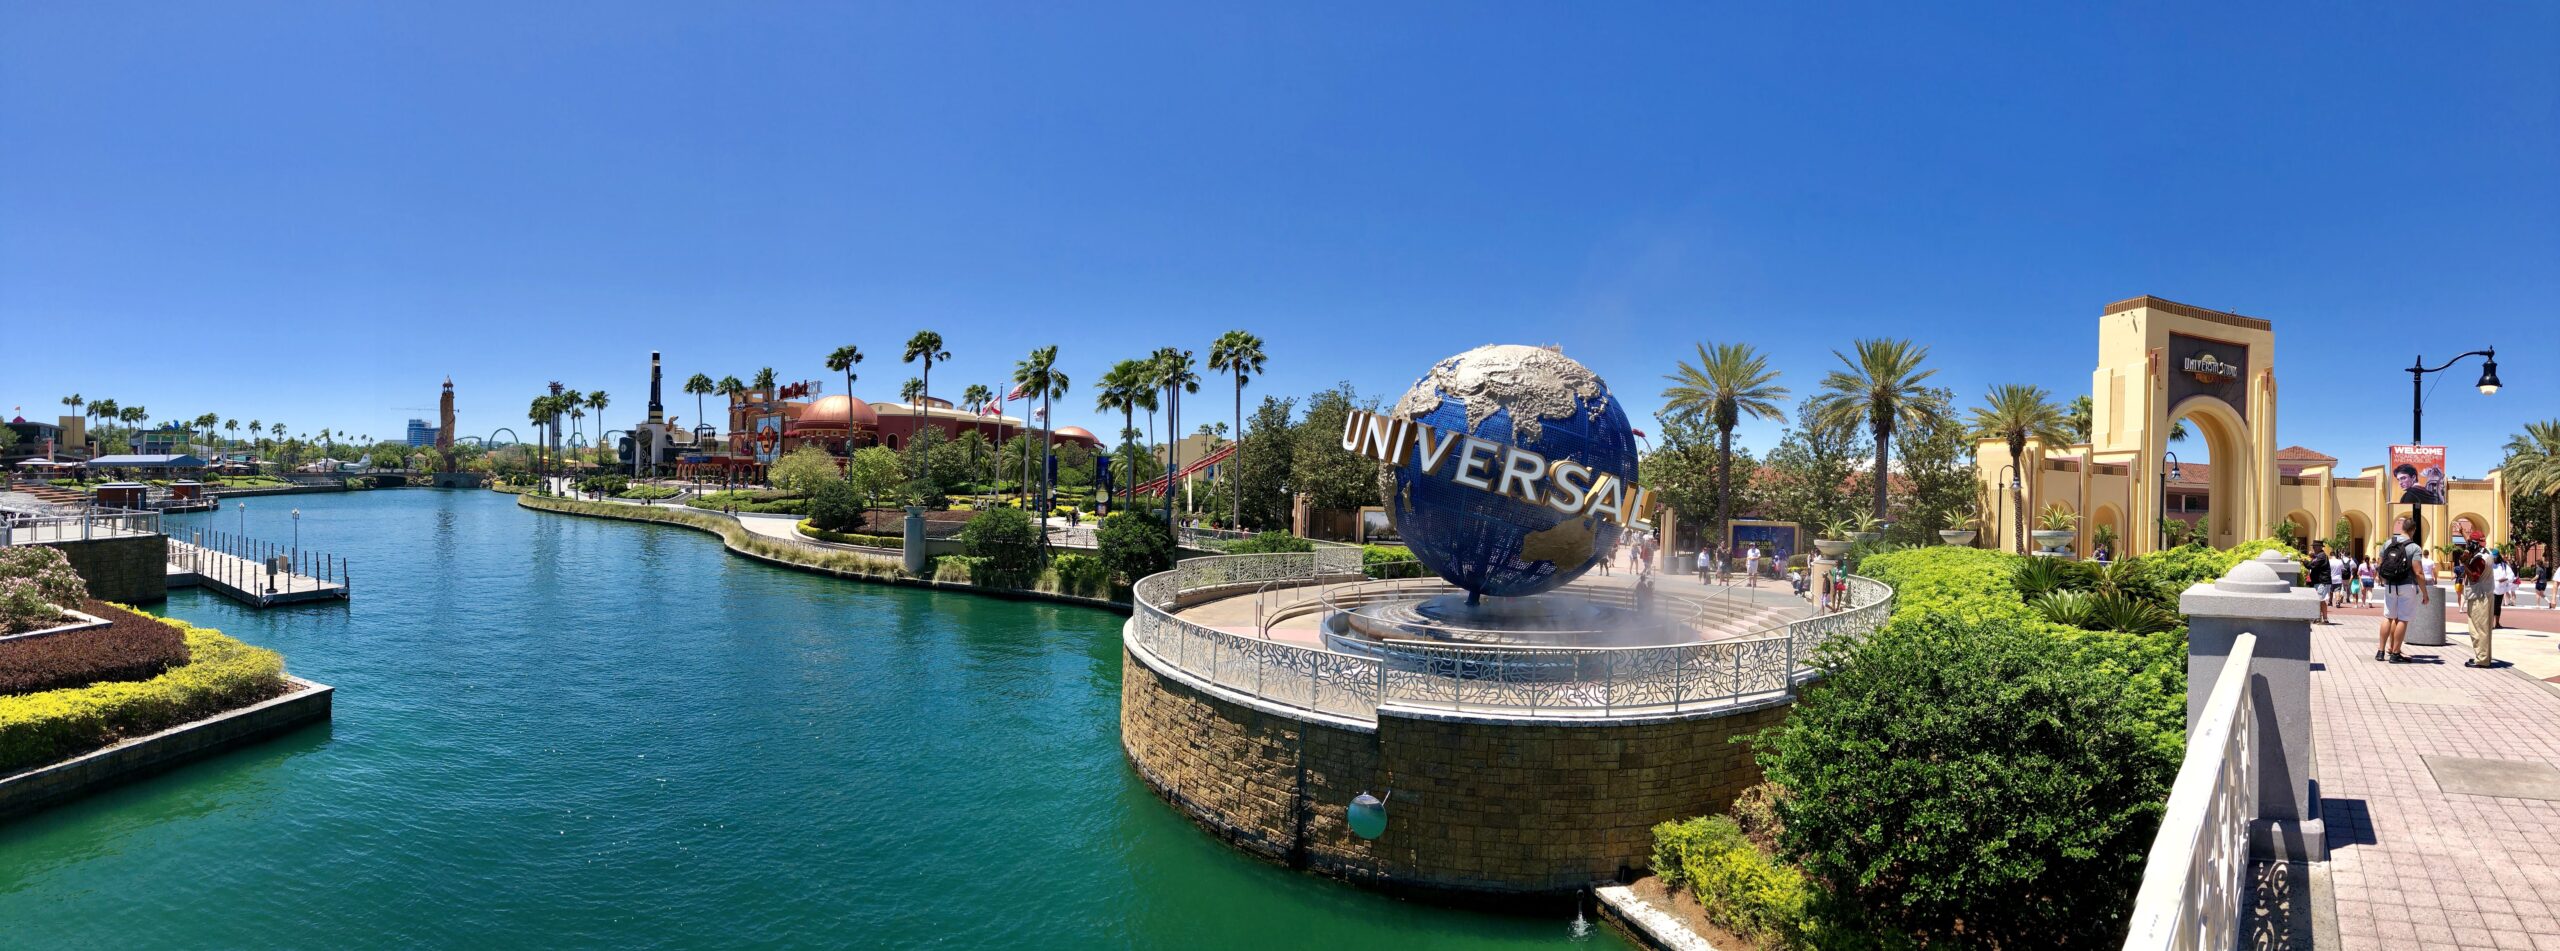 panoramic view of the hub connecting Citywalk, Universal Studios, and Islands of adventure with multiple buildings and icons